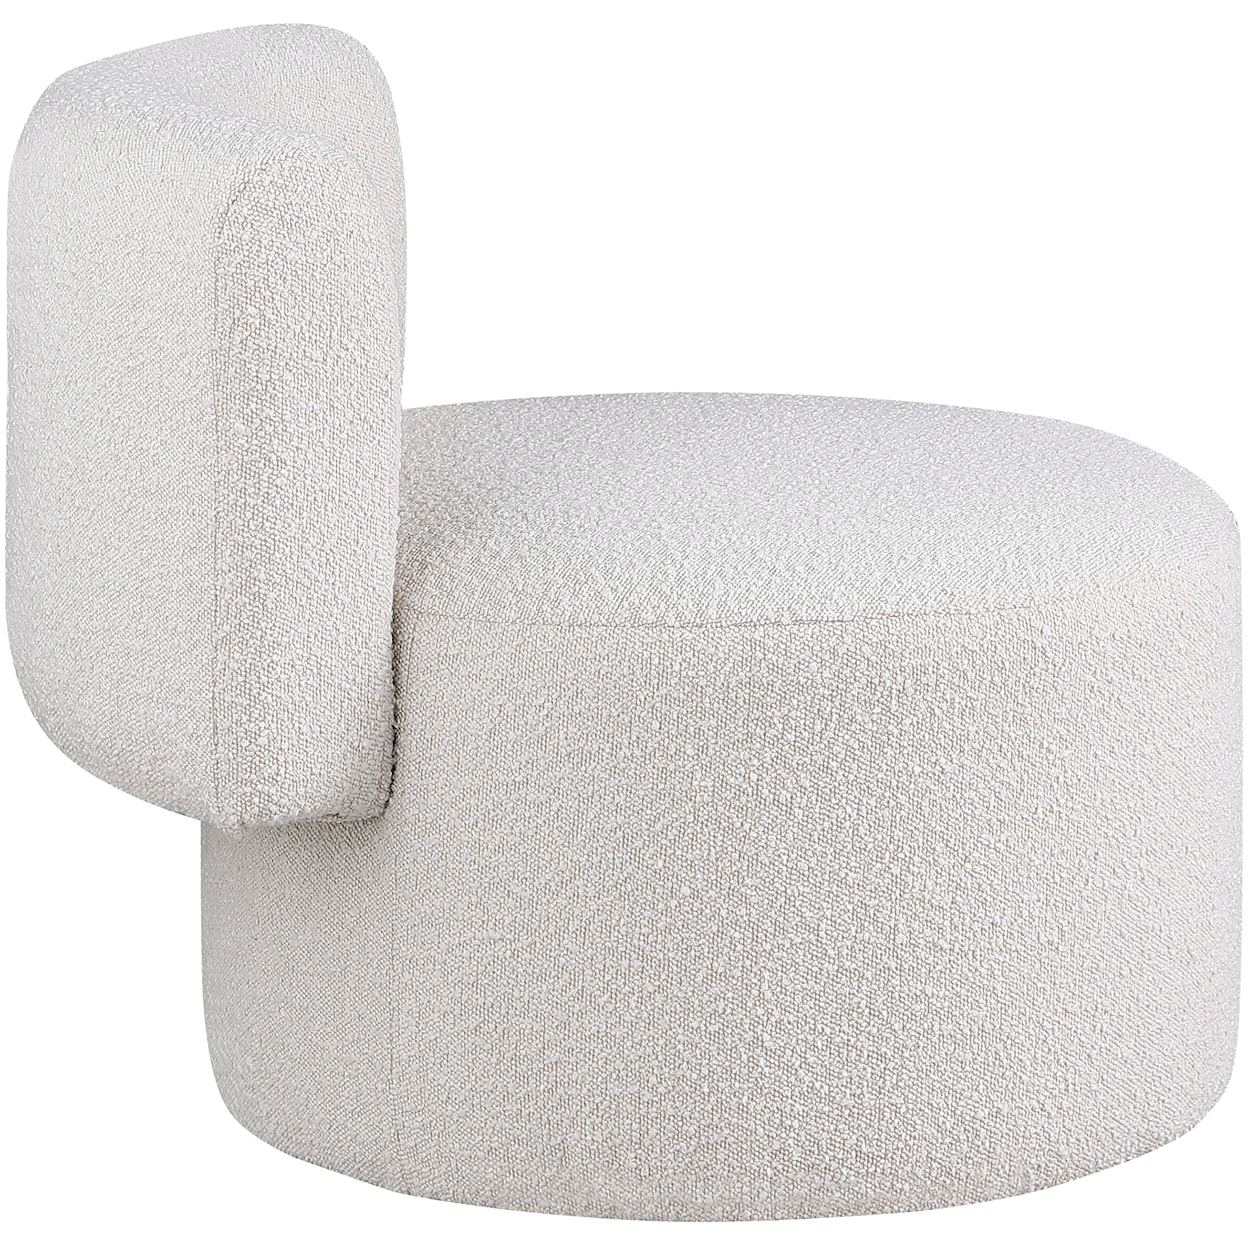 Meridian Furniture Como Upholstered Cream Boucle Fabric Accent Chair